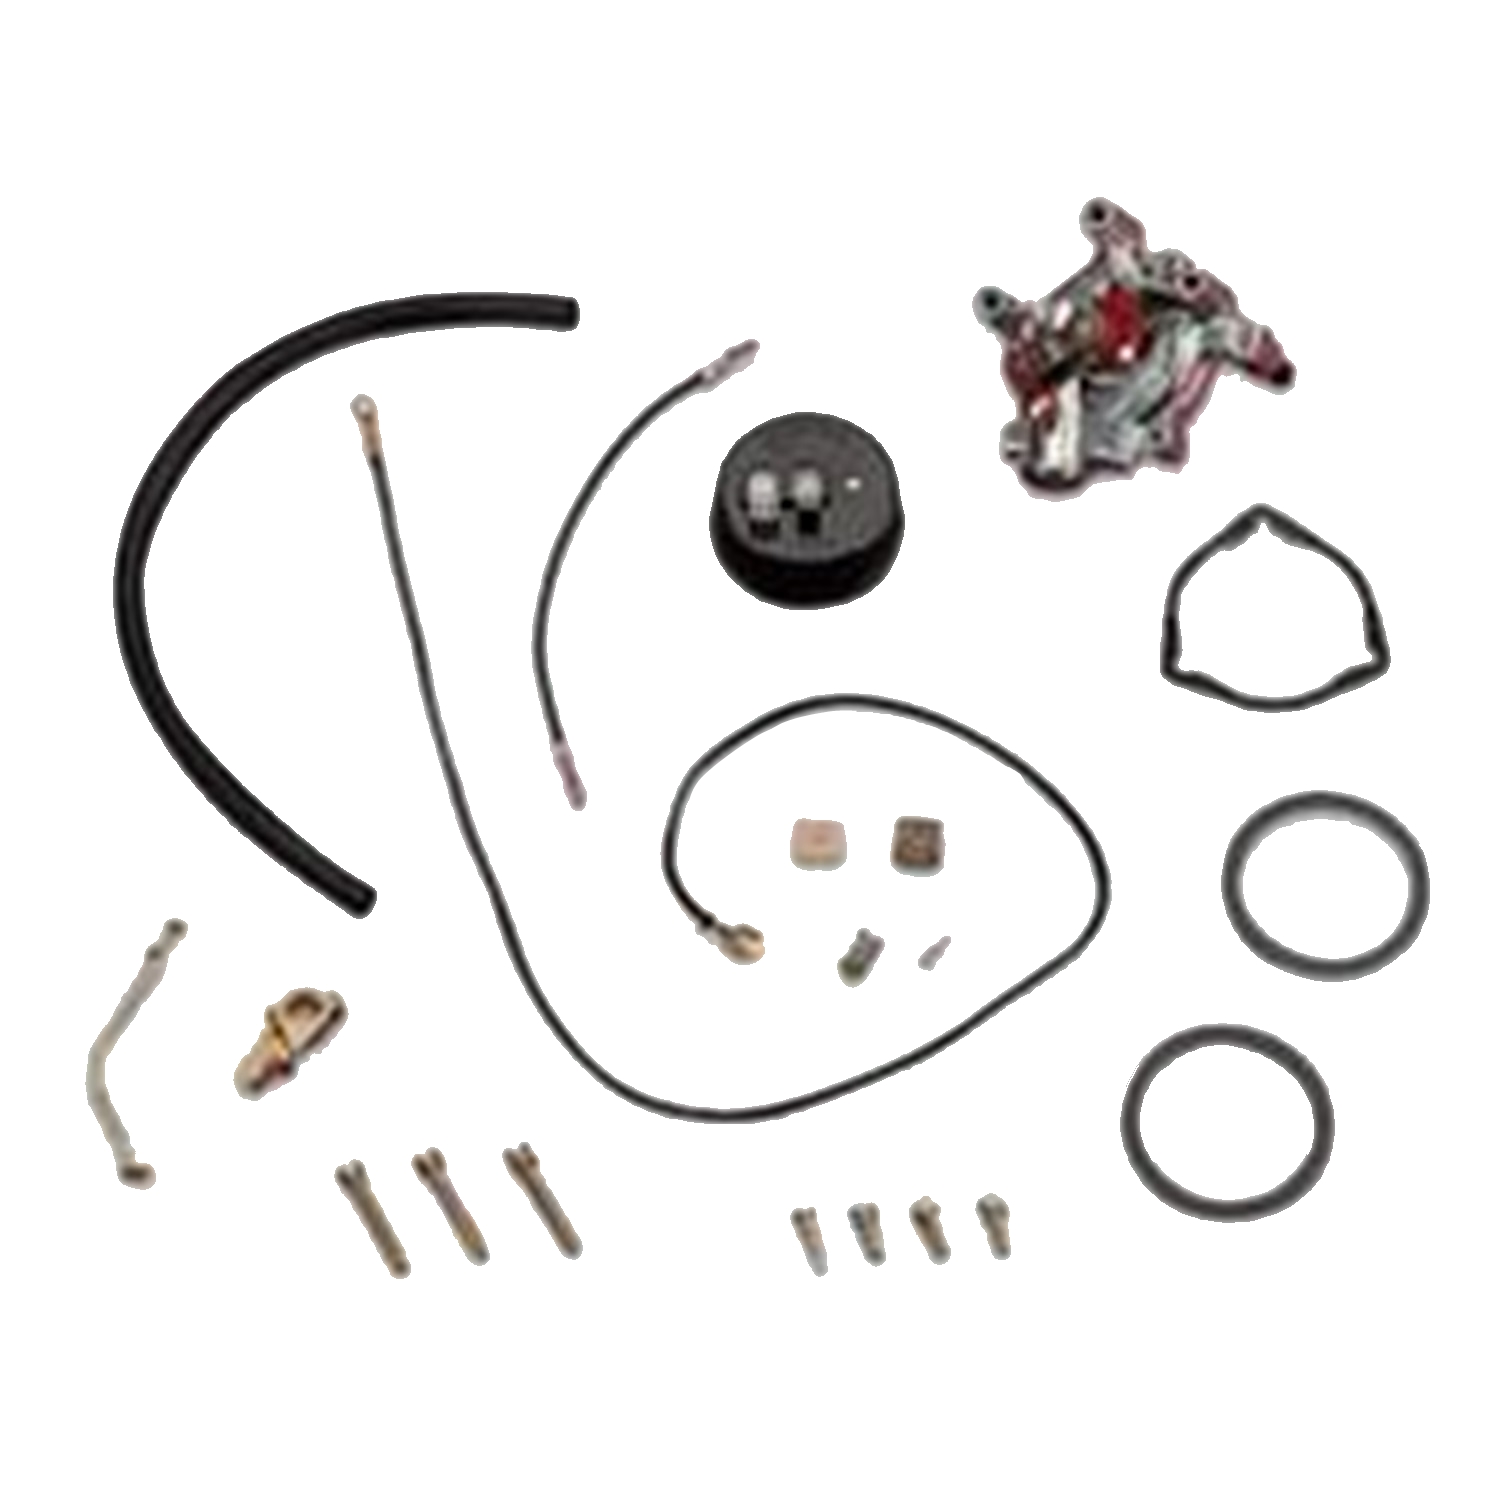 Holley Performance Holley Performance 45-223S Choke Conversion Kit